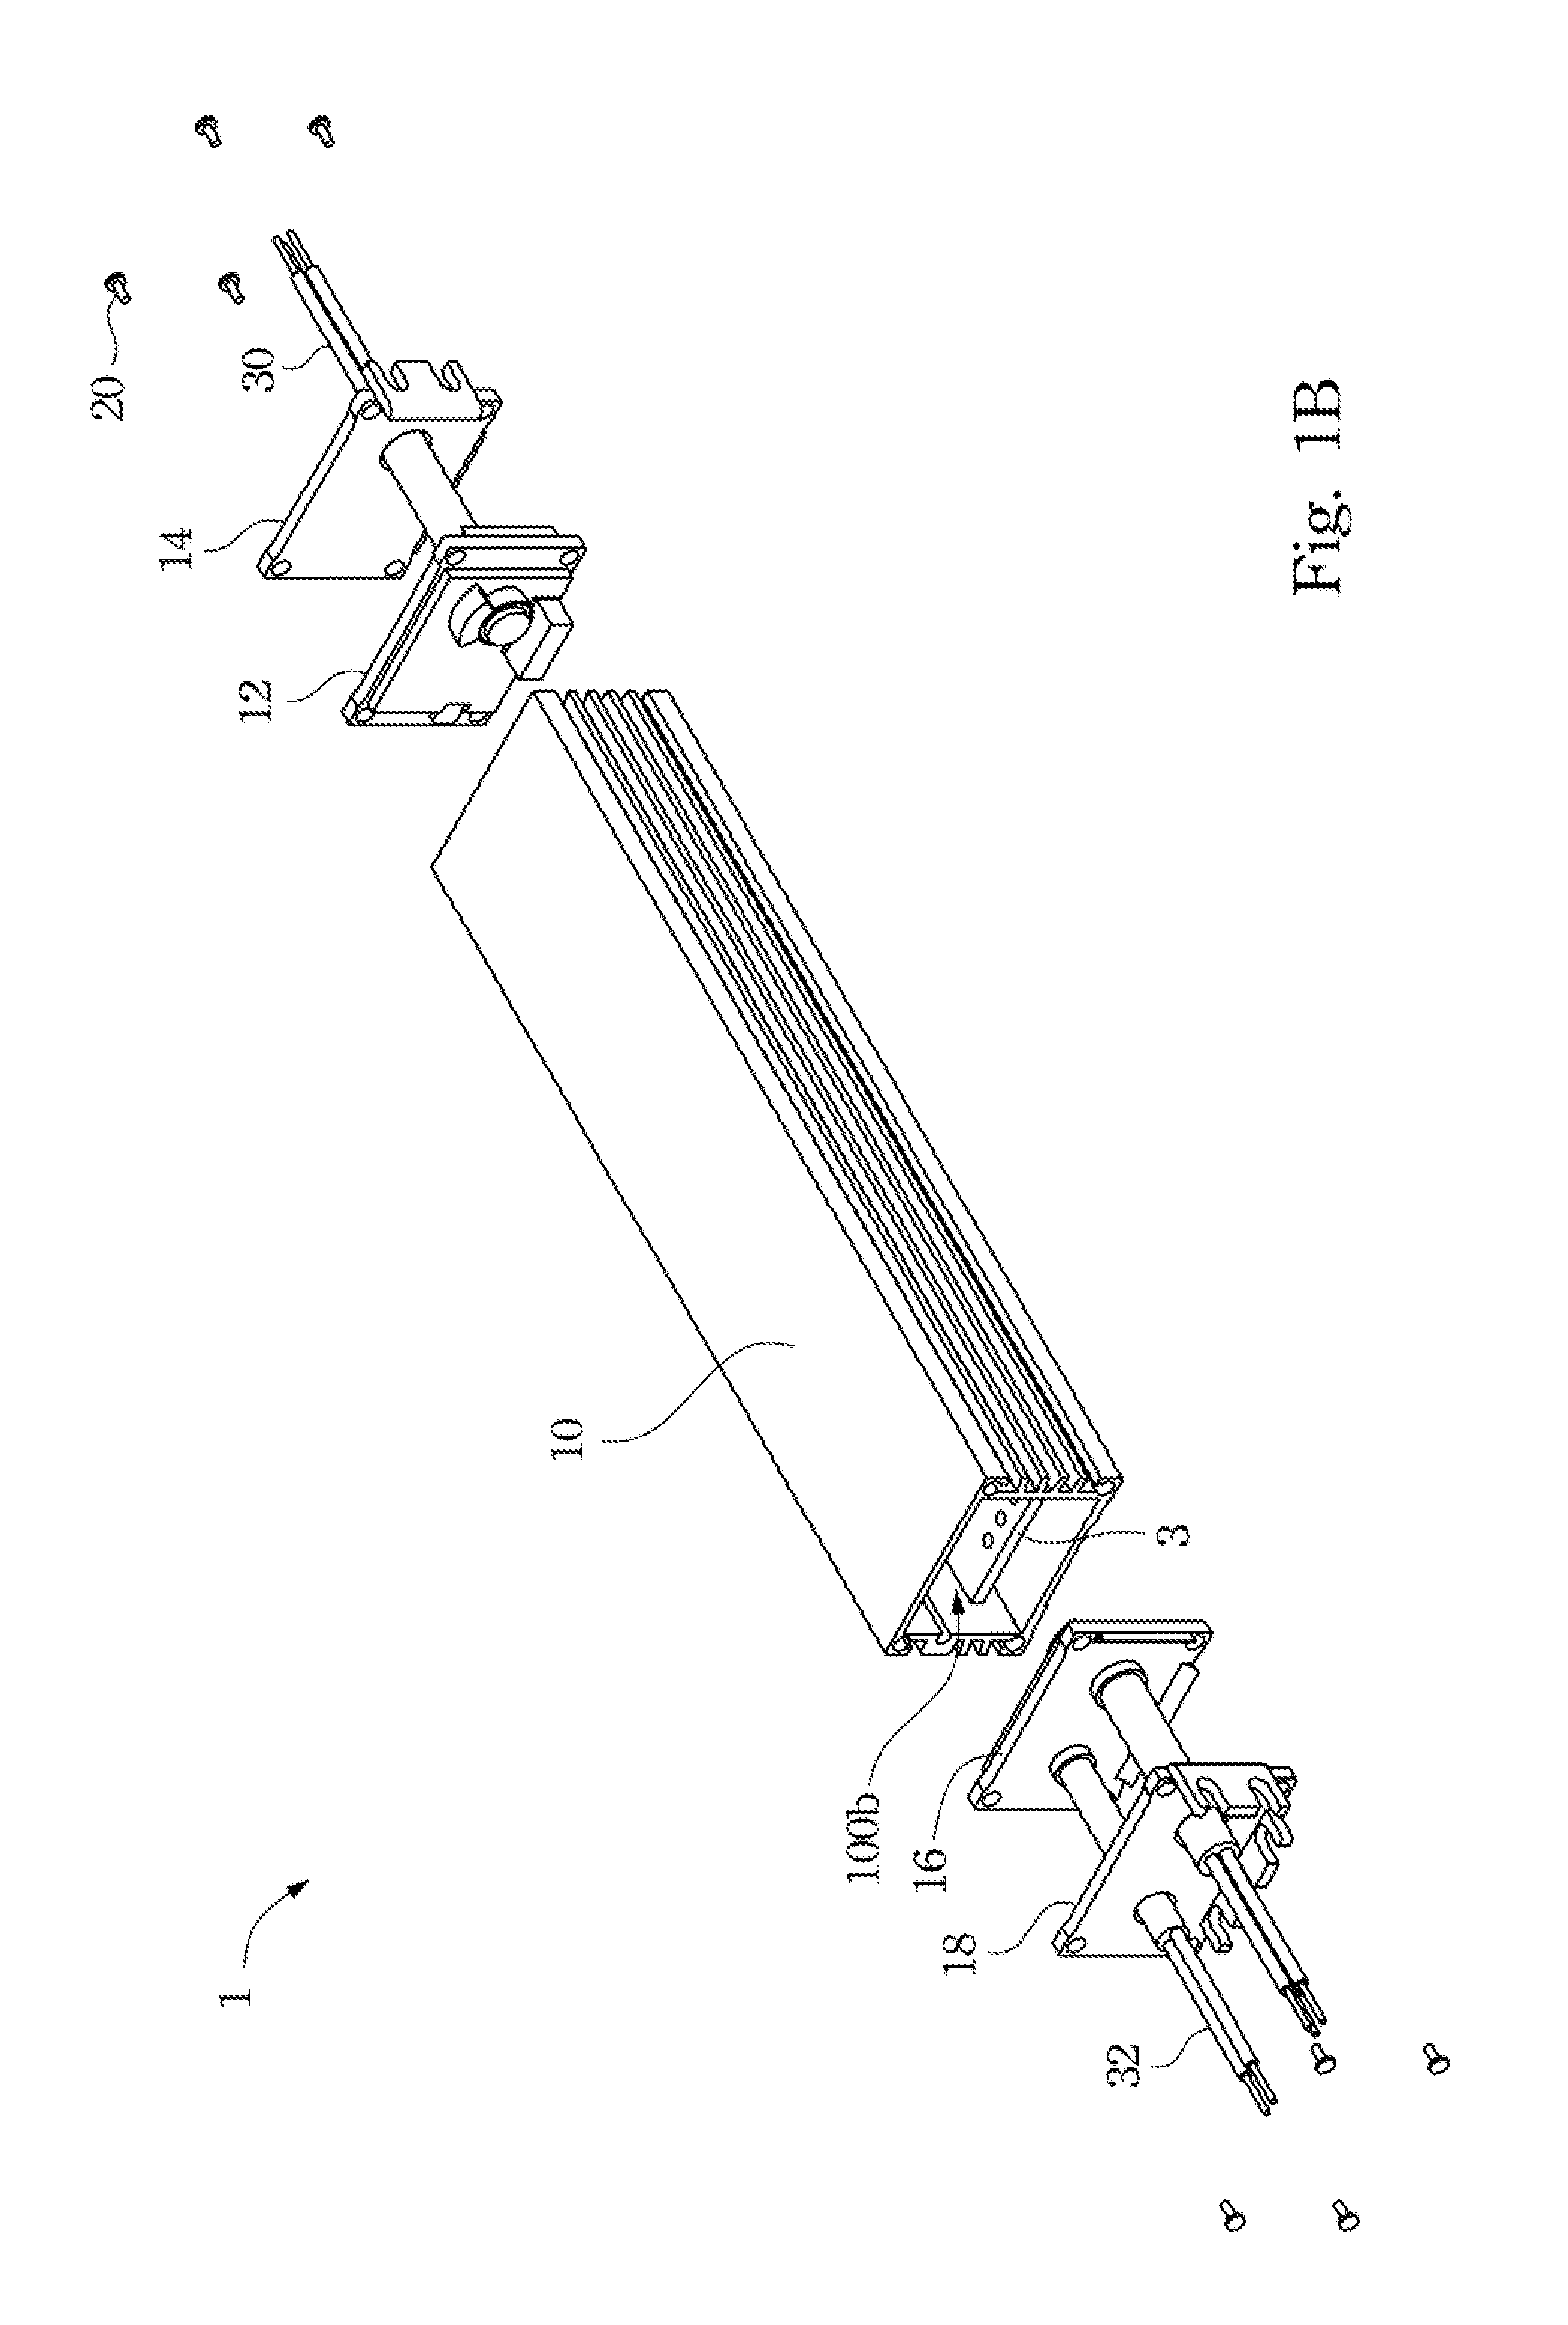 External structure of outdoor electronic apparatus